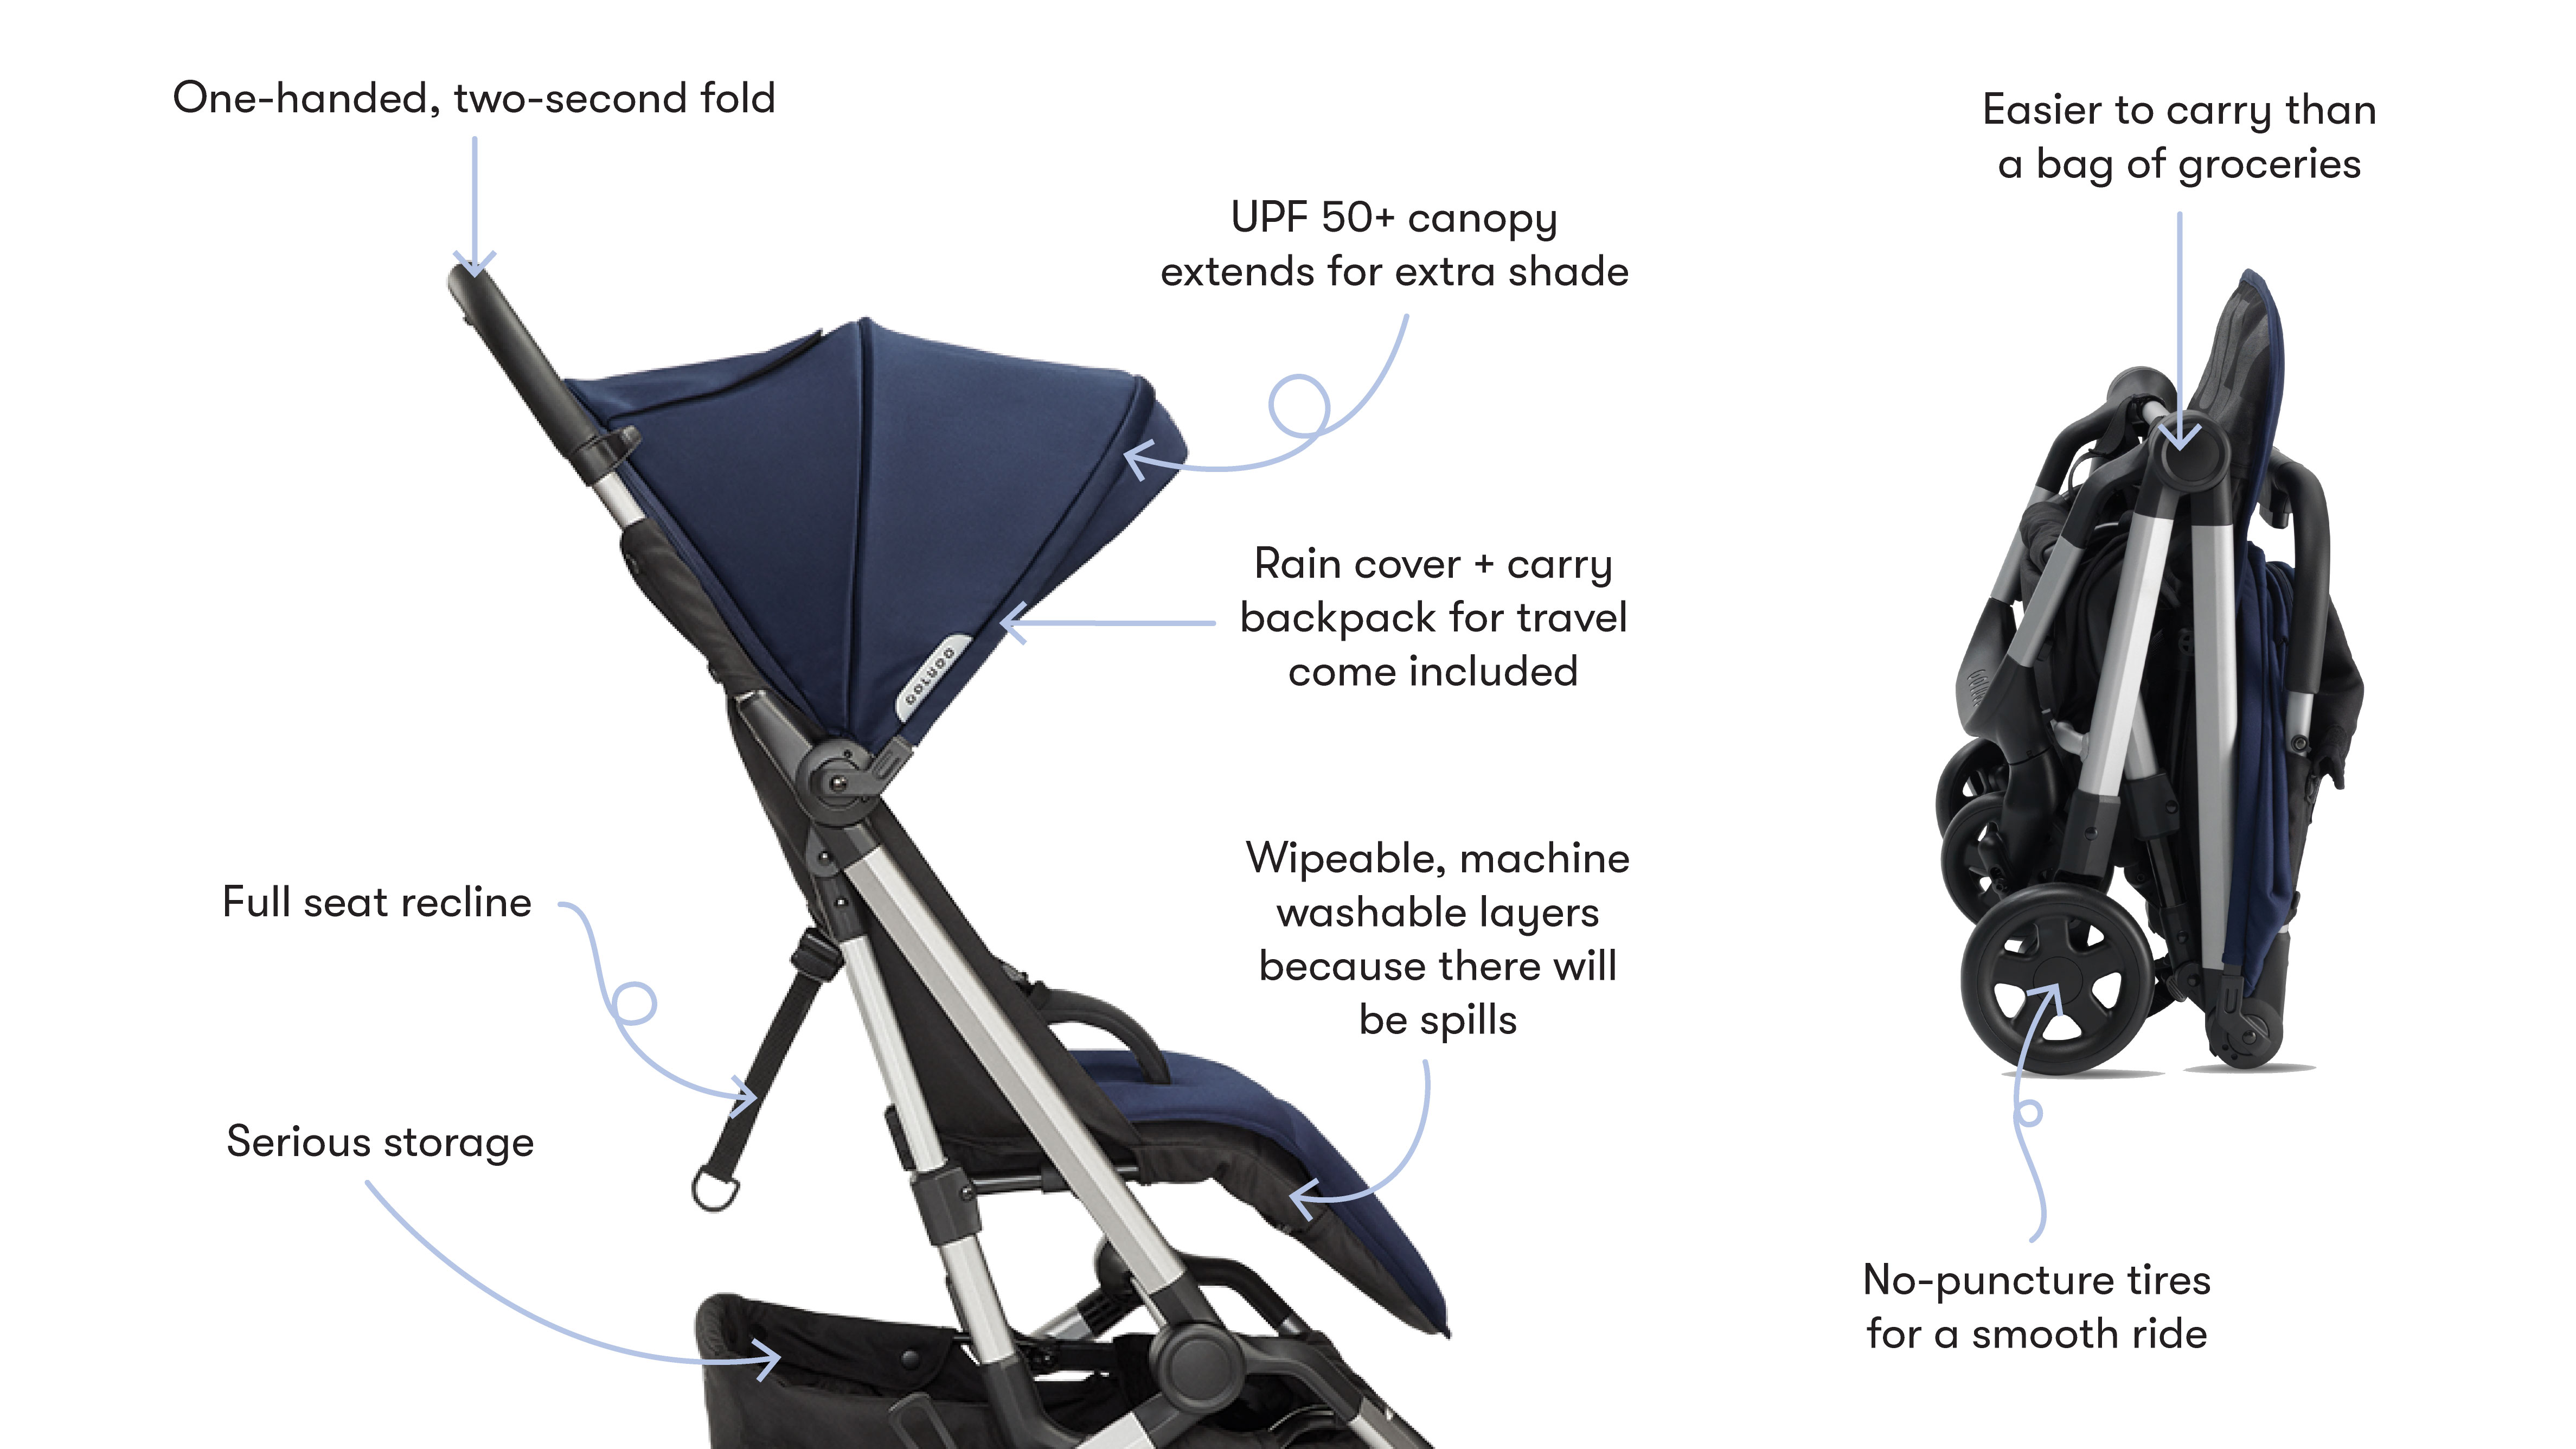 stroller folds up small